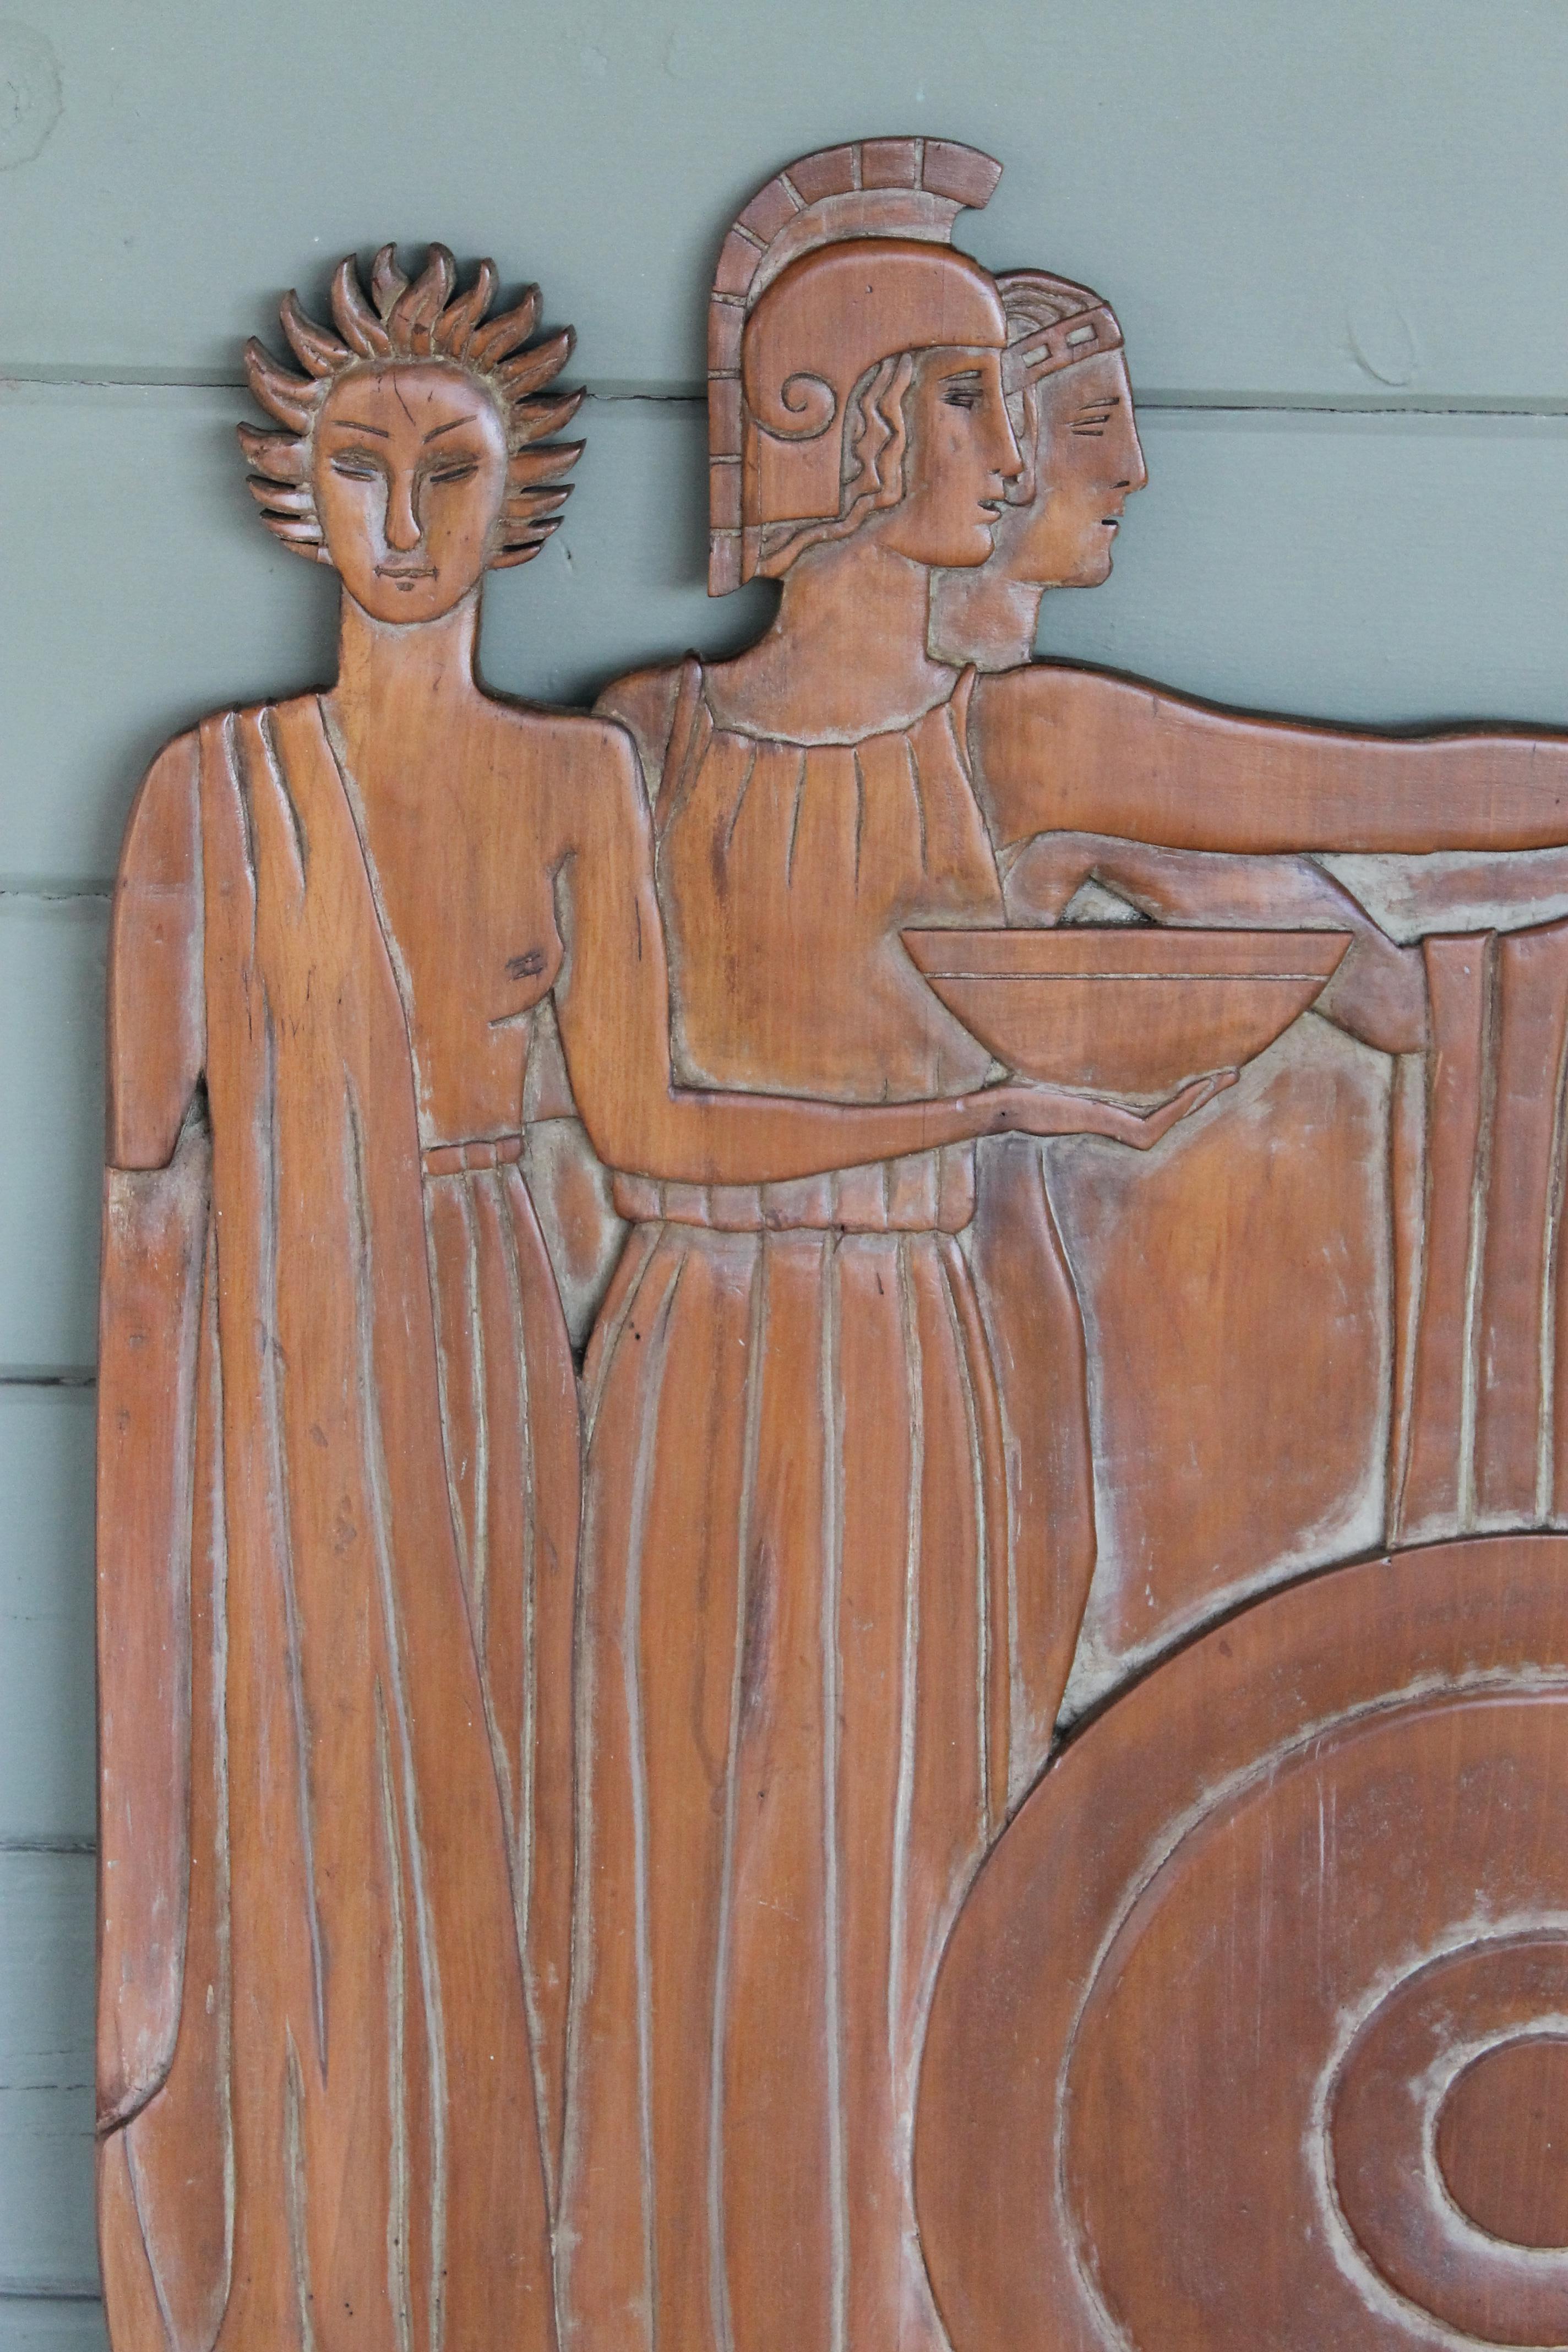 A carved bas-relief of figures dressed in ancient Roman attire. Wood is a hardwood, possibly maple, and has a soft wash of pale grey visible in the recesses. It measures 28